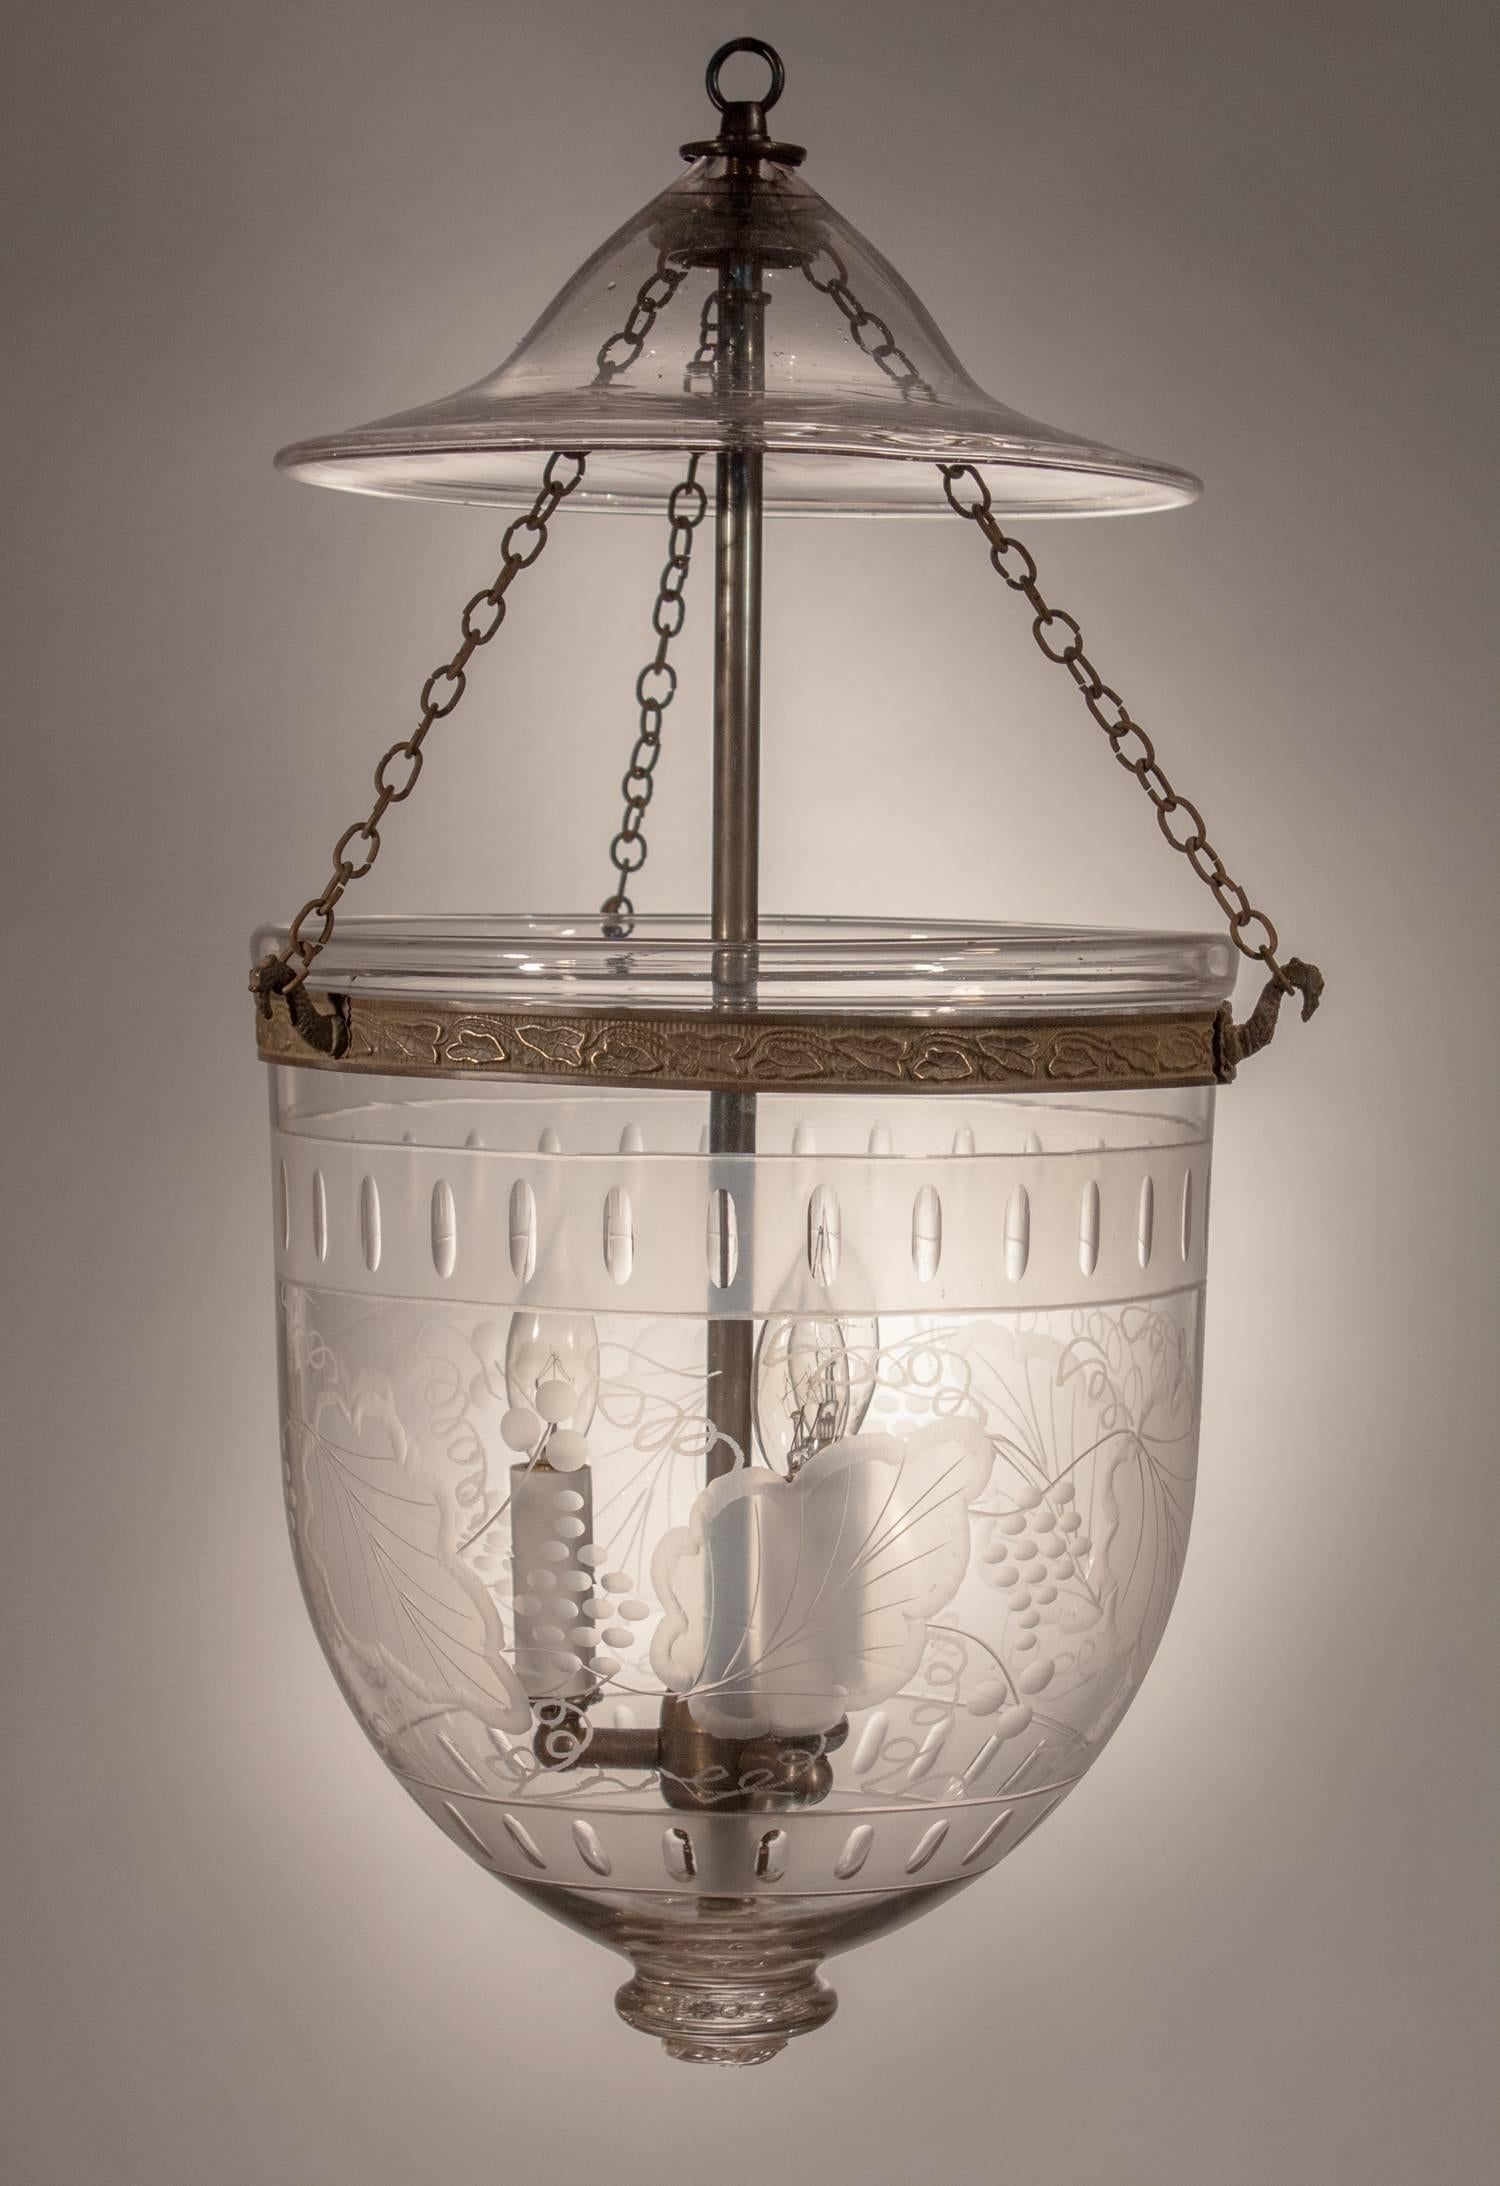 An exceptional bell jar lantern with its original etched smoke bell and brass details. This medium-sized hall lantern is distinctively decorated with a leaf and berry motif bounded by frosted banding at top and bottom. The light has been newly